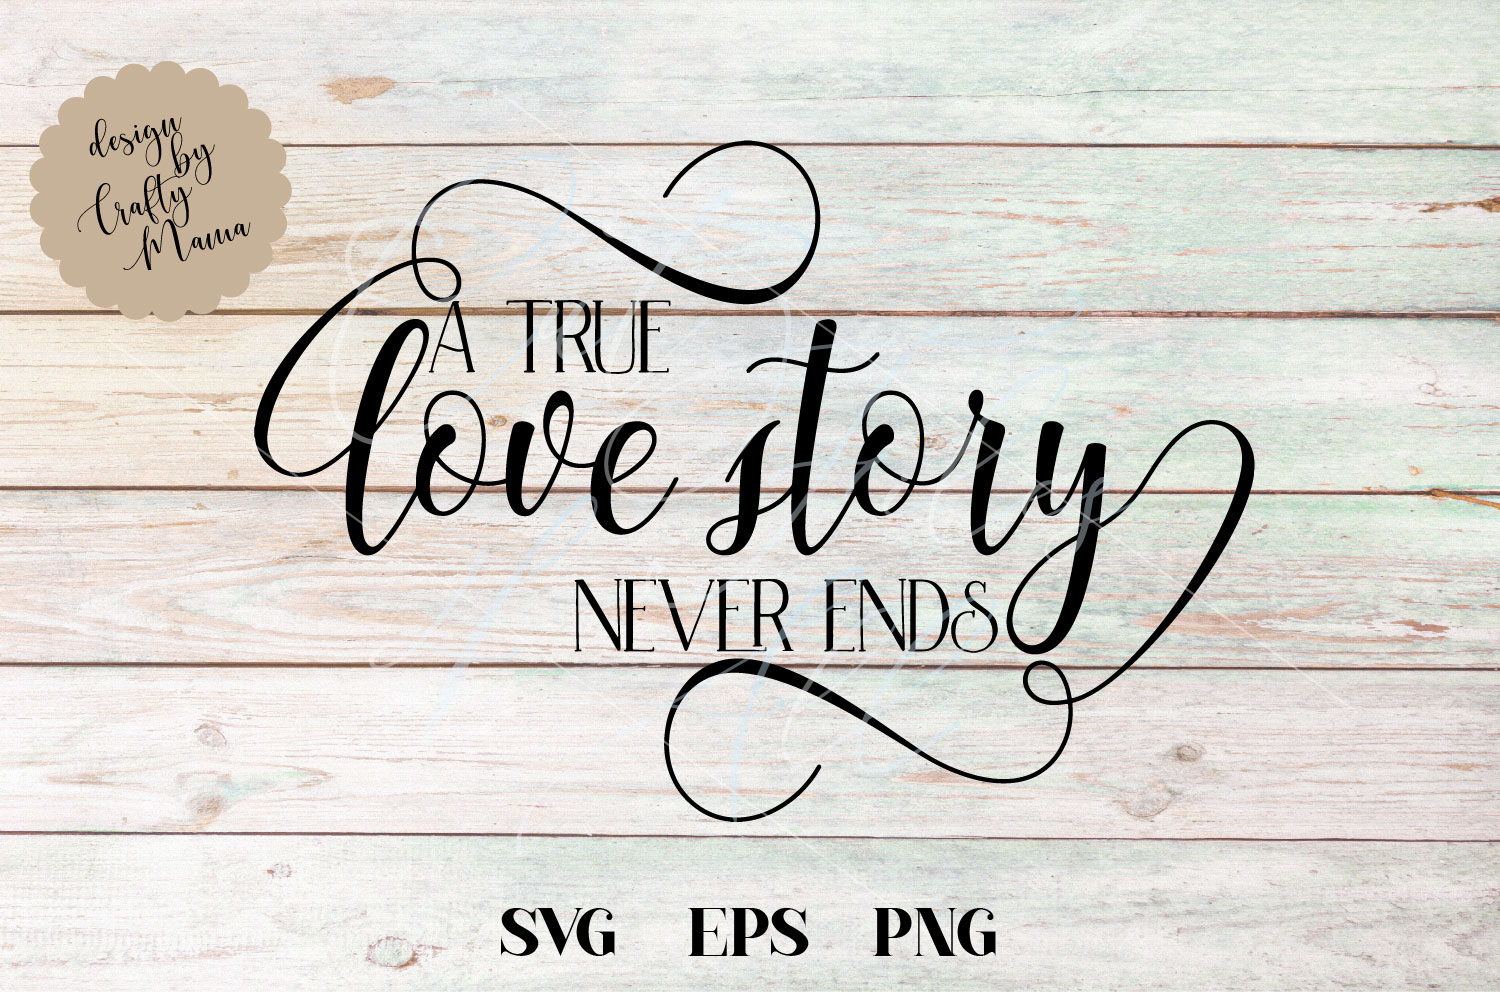 True Love Story Never Ends SVG Couples Wedding Sublimation